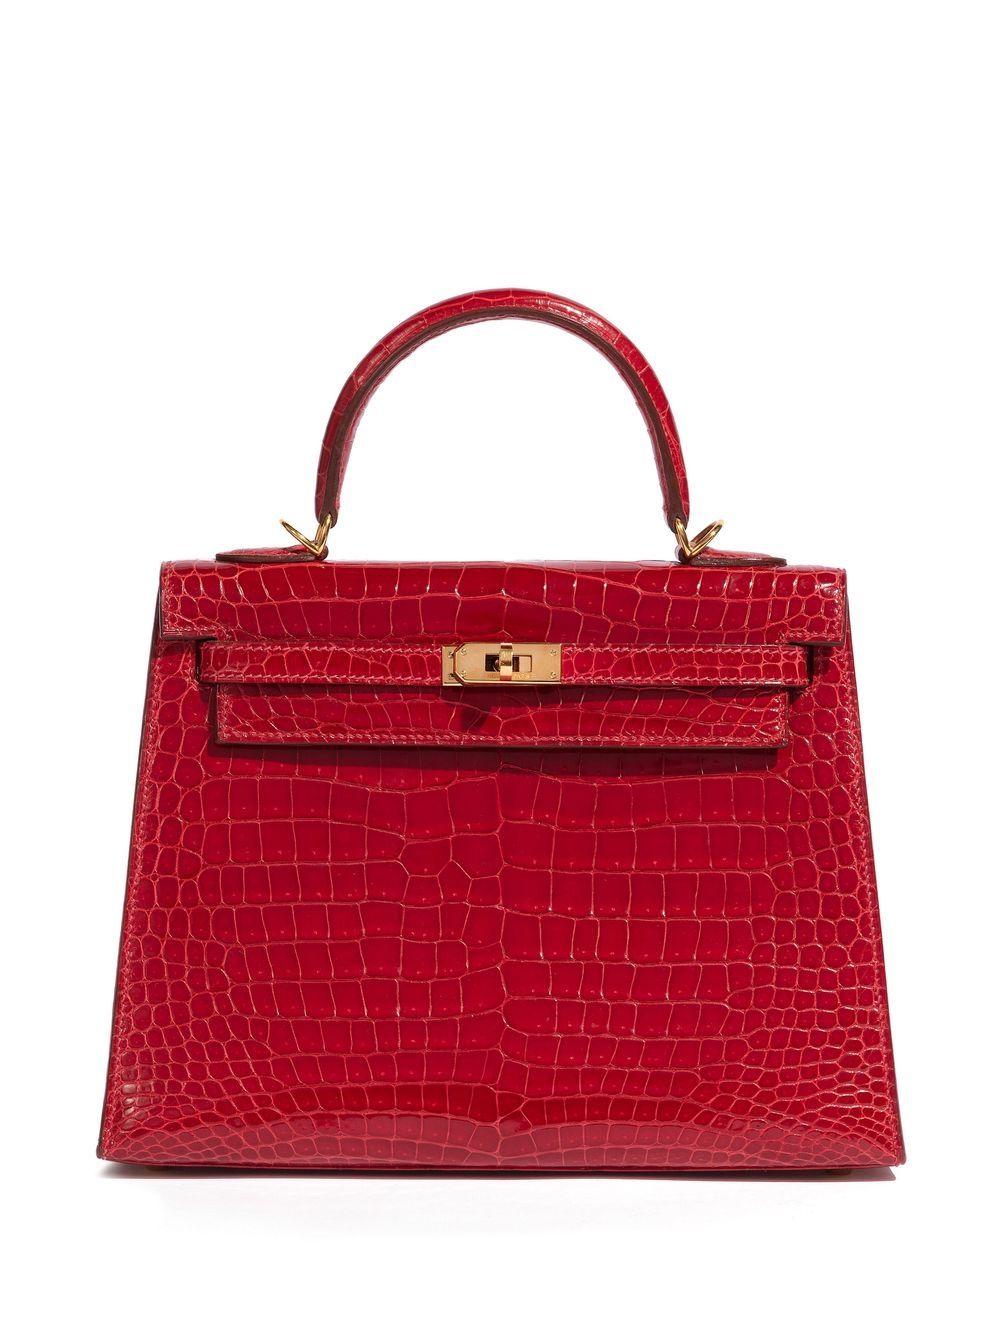 In excellent condition, this red Hermès 25cm Kelly comes in a gorgeous shiny red Niloticus leather and gold hardware. This handbag is a true showstopper, coming with its original dustbag. 